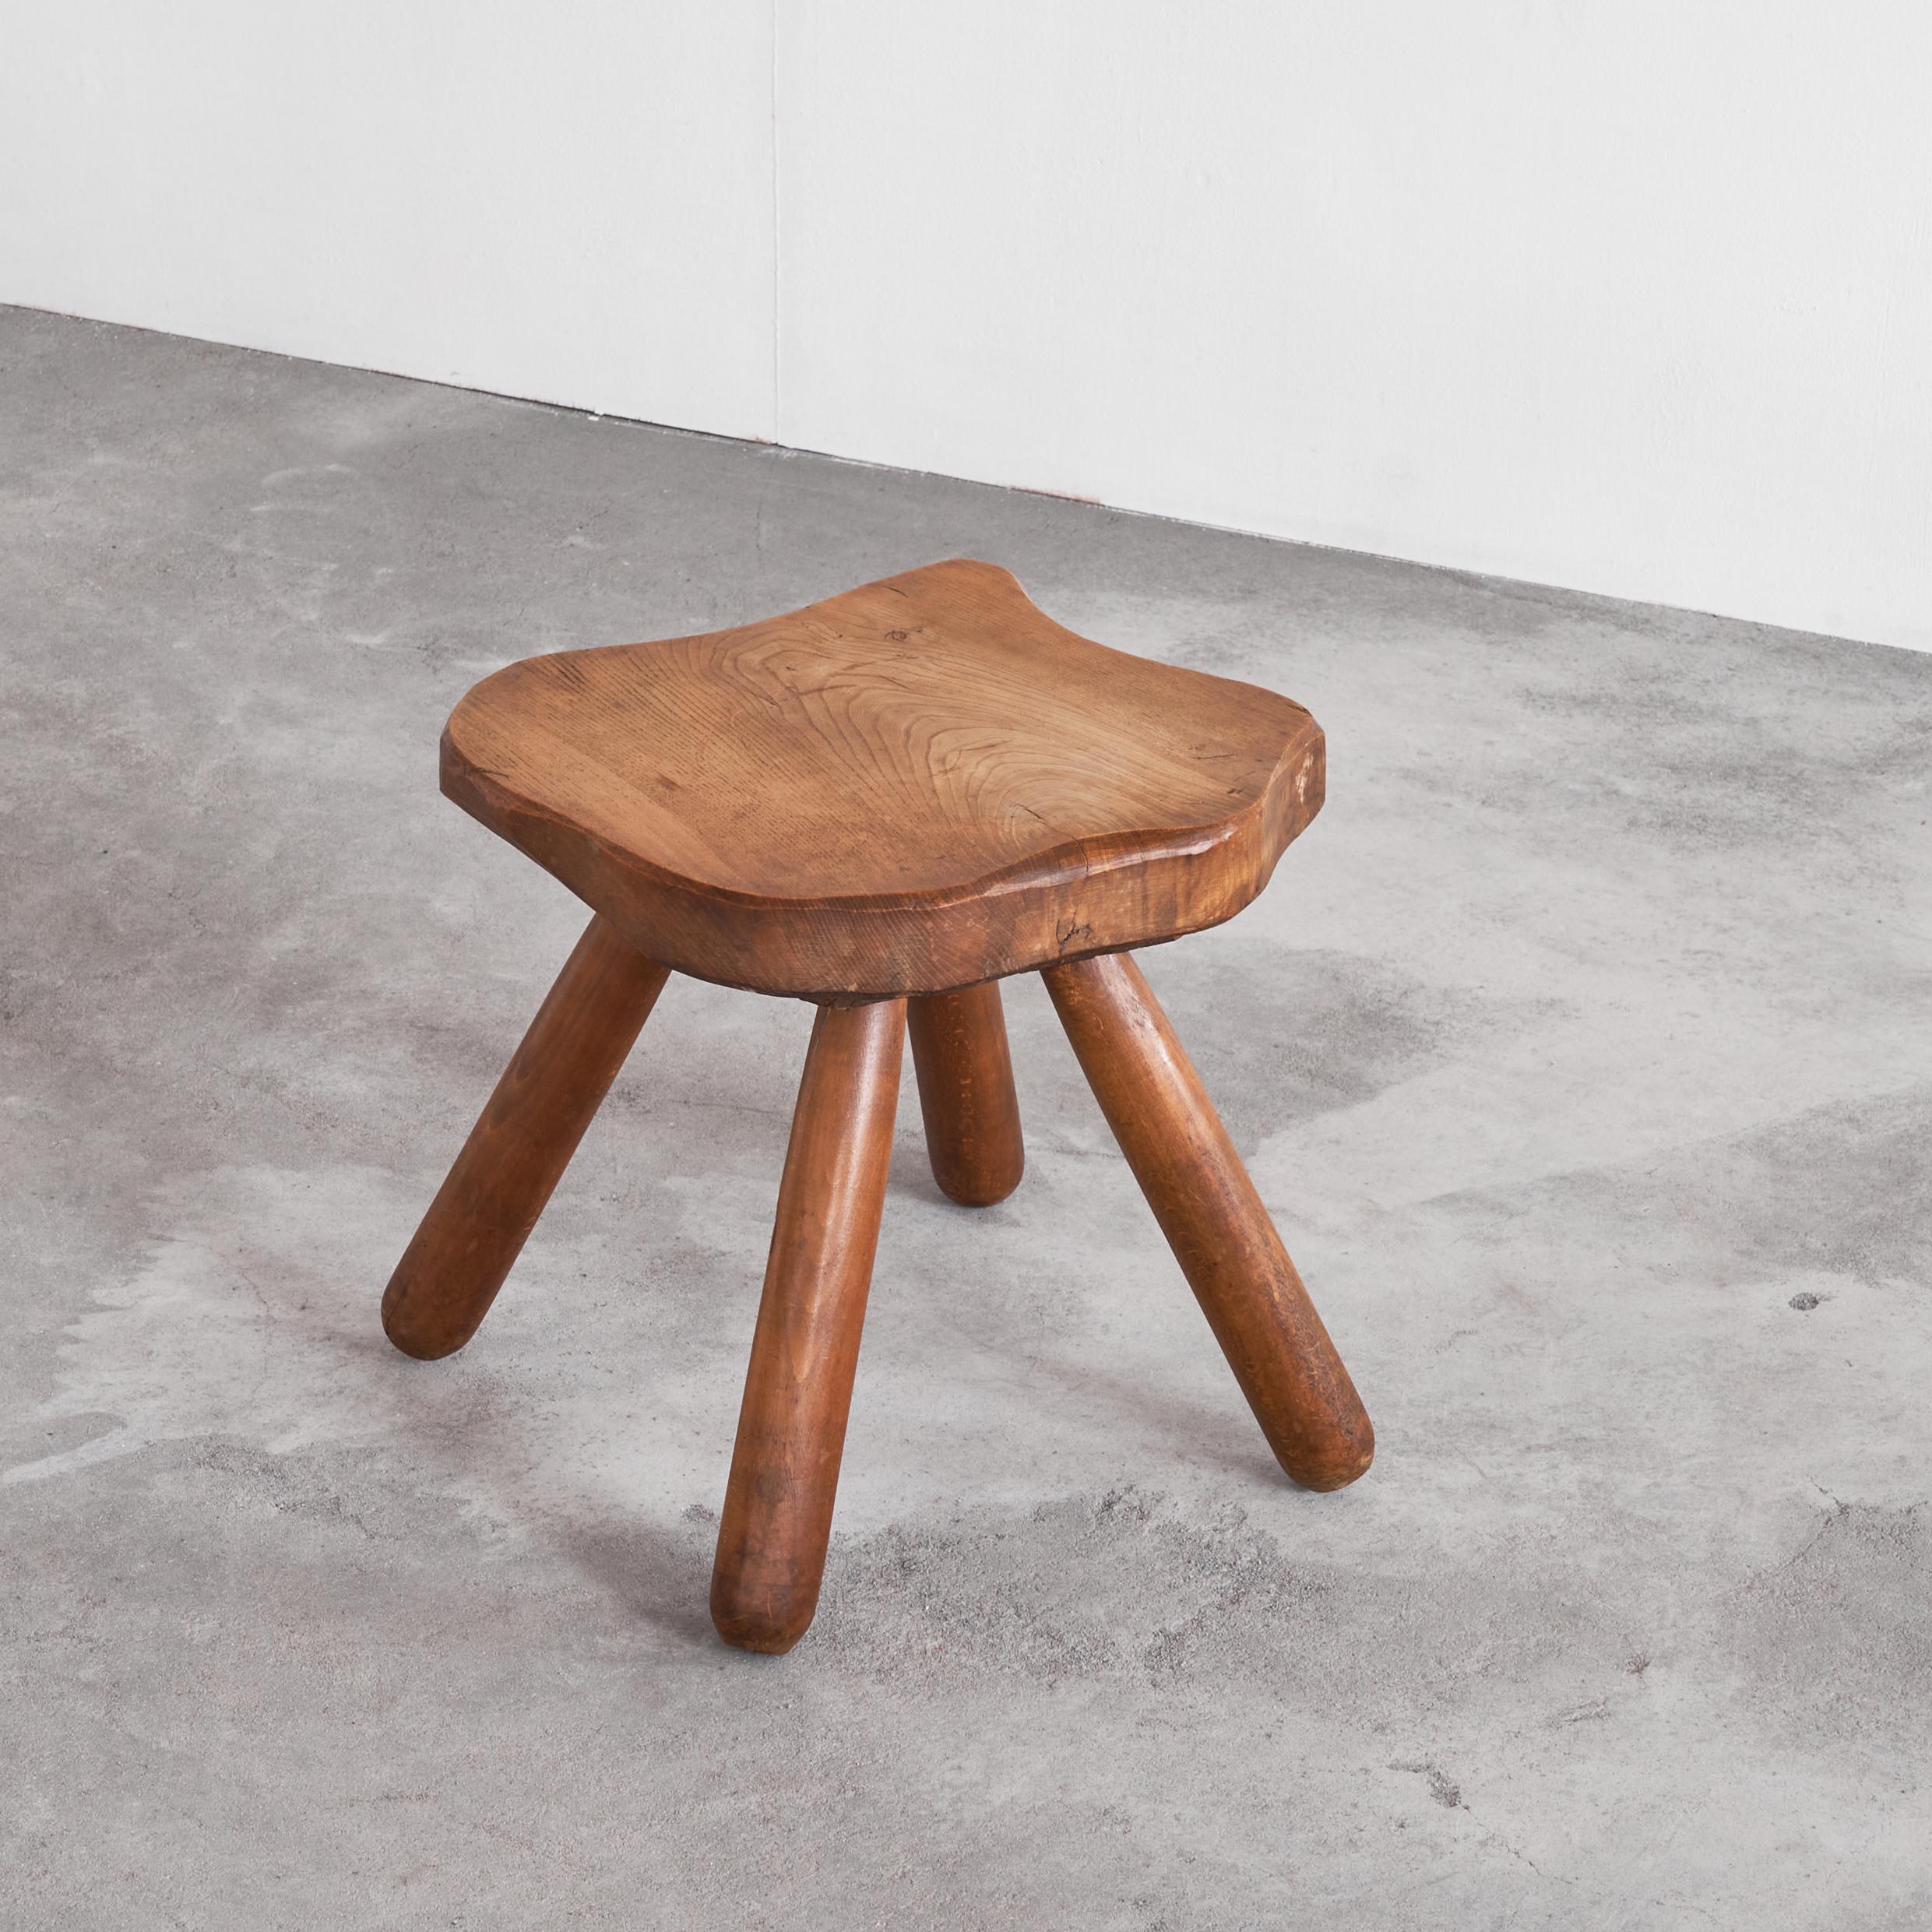 Freeform Side Table or Stool in Solid Wood, 1950s.

Very beautiful and stylish freeform side table in solid wood, made by a skilled craftsman somewhere in the middle of the 20th century. Great freeform shape and a distinct handmade quality.